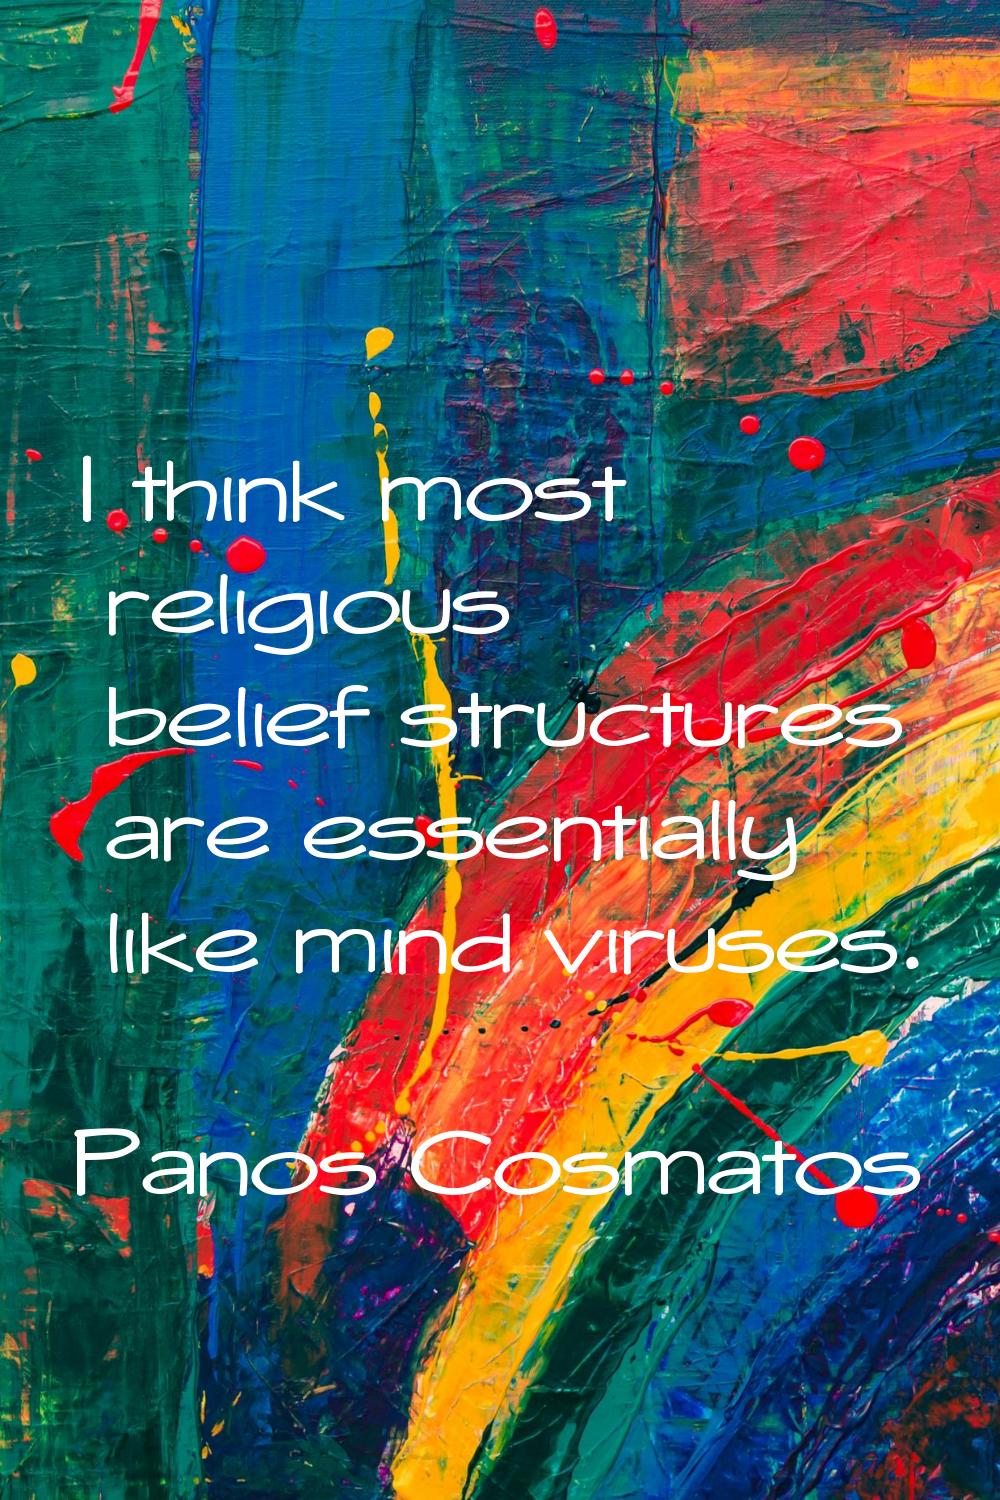 I think most religious belief structures are essentially like mind viruses.